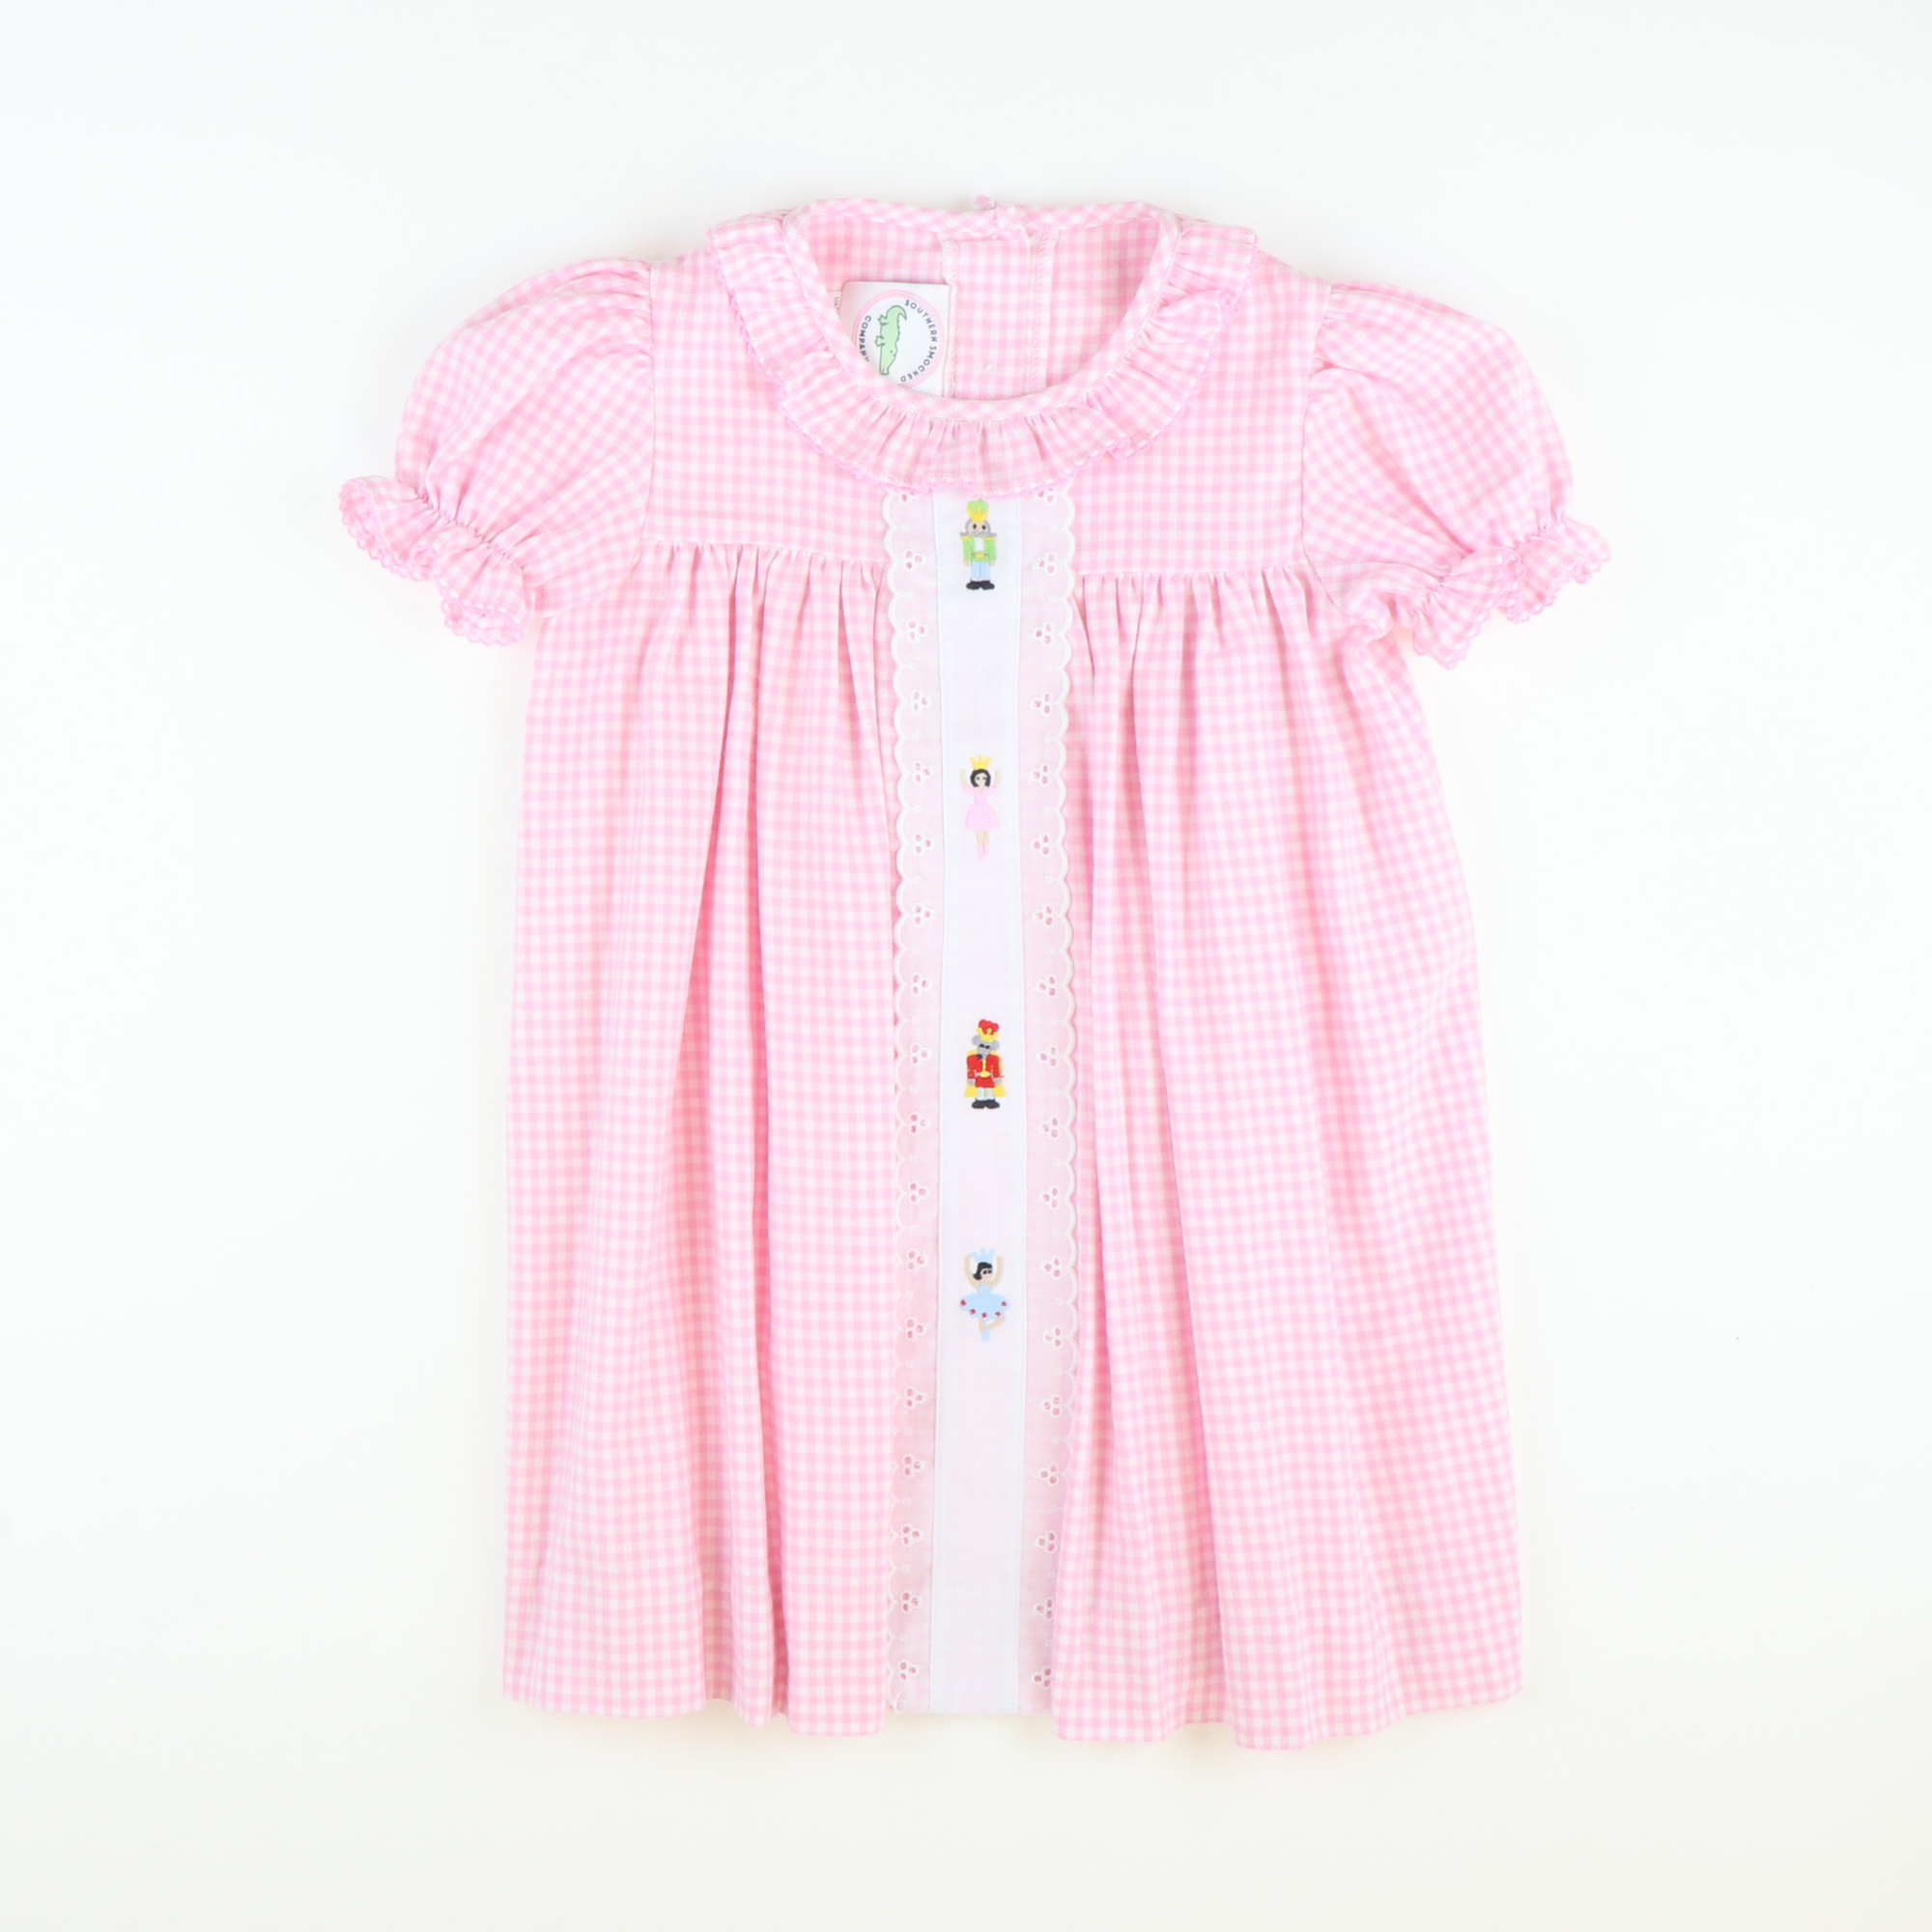 Embroidered Nutcracker Ruffle Dress - Light Pink Check Flannel